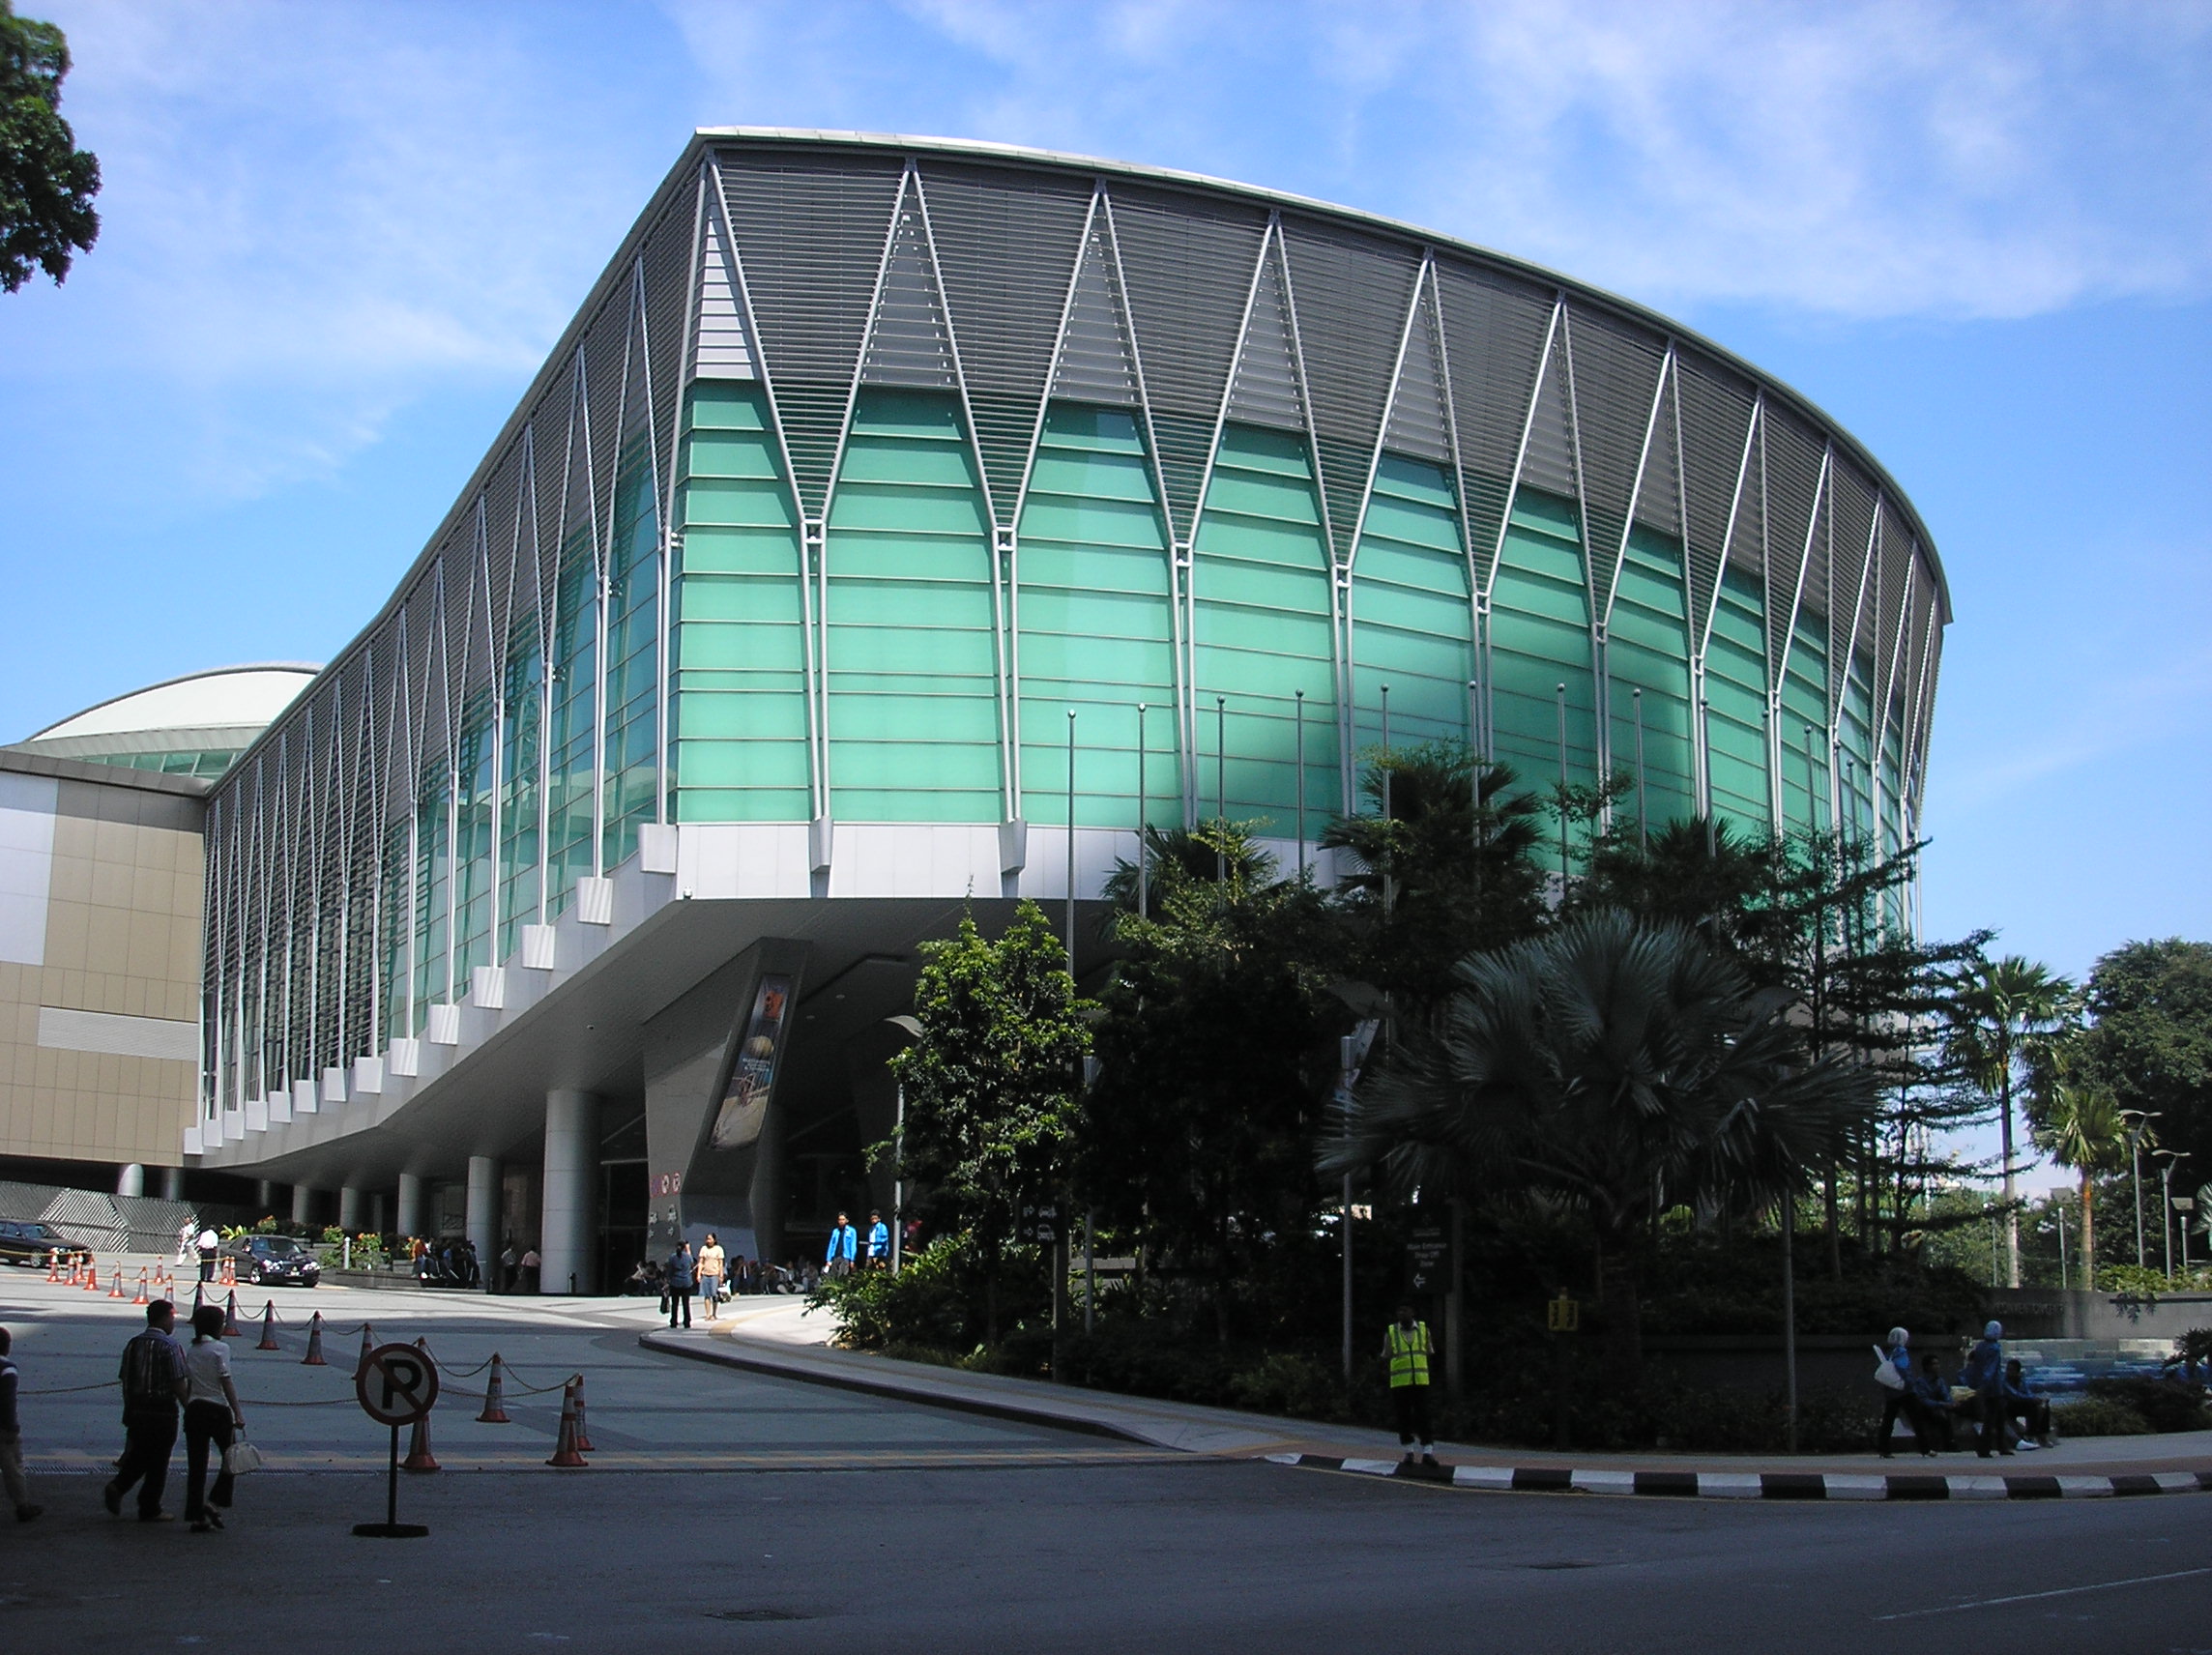 The Kuala Lumpur Convention Centre will be raising the minimum wage of its full-time staff to RM2,500. Image credit: Wikimedia Commons